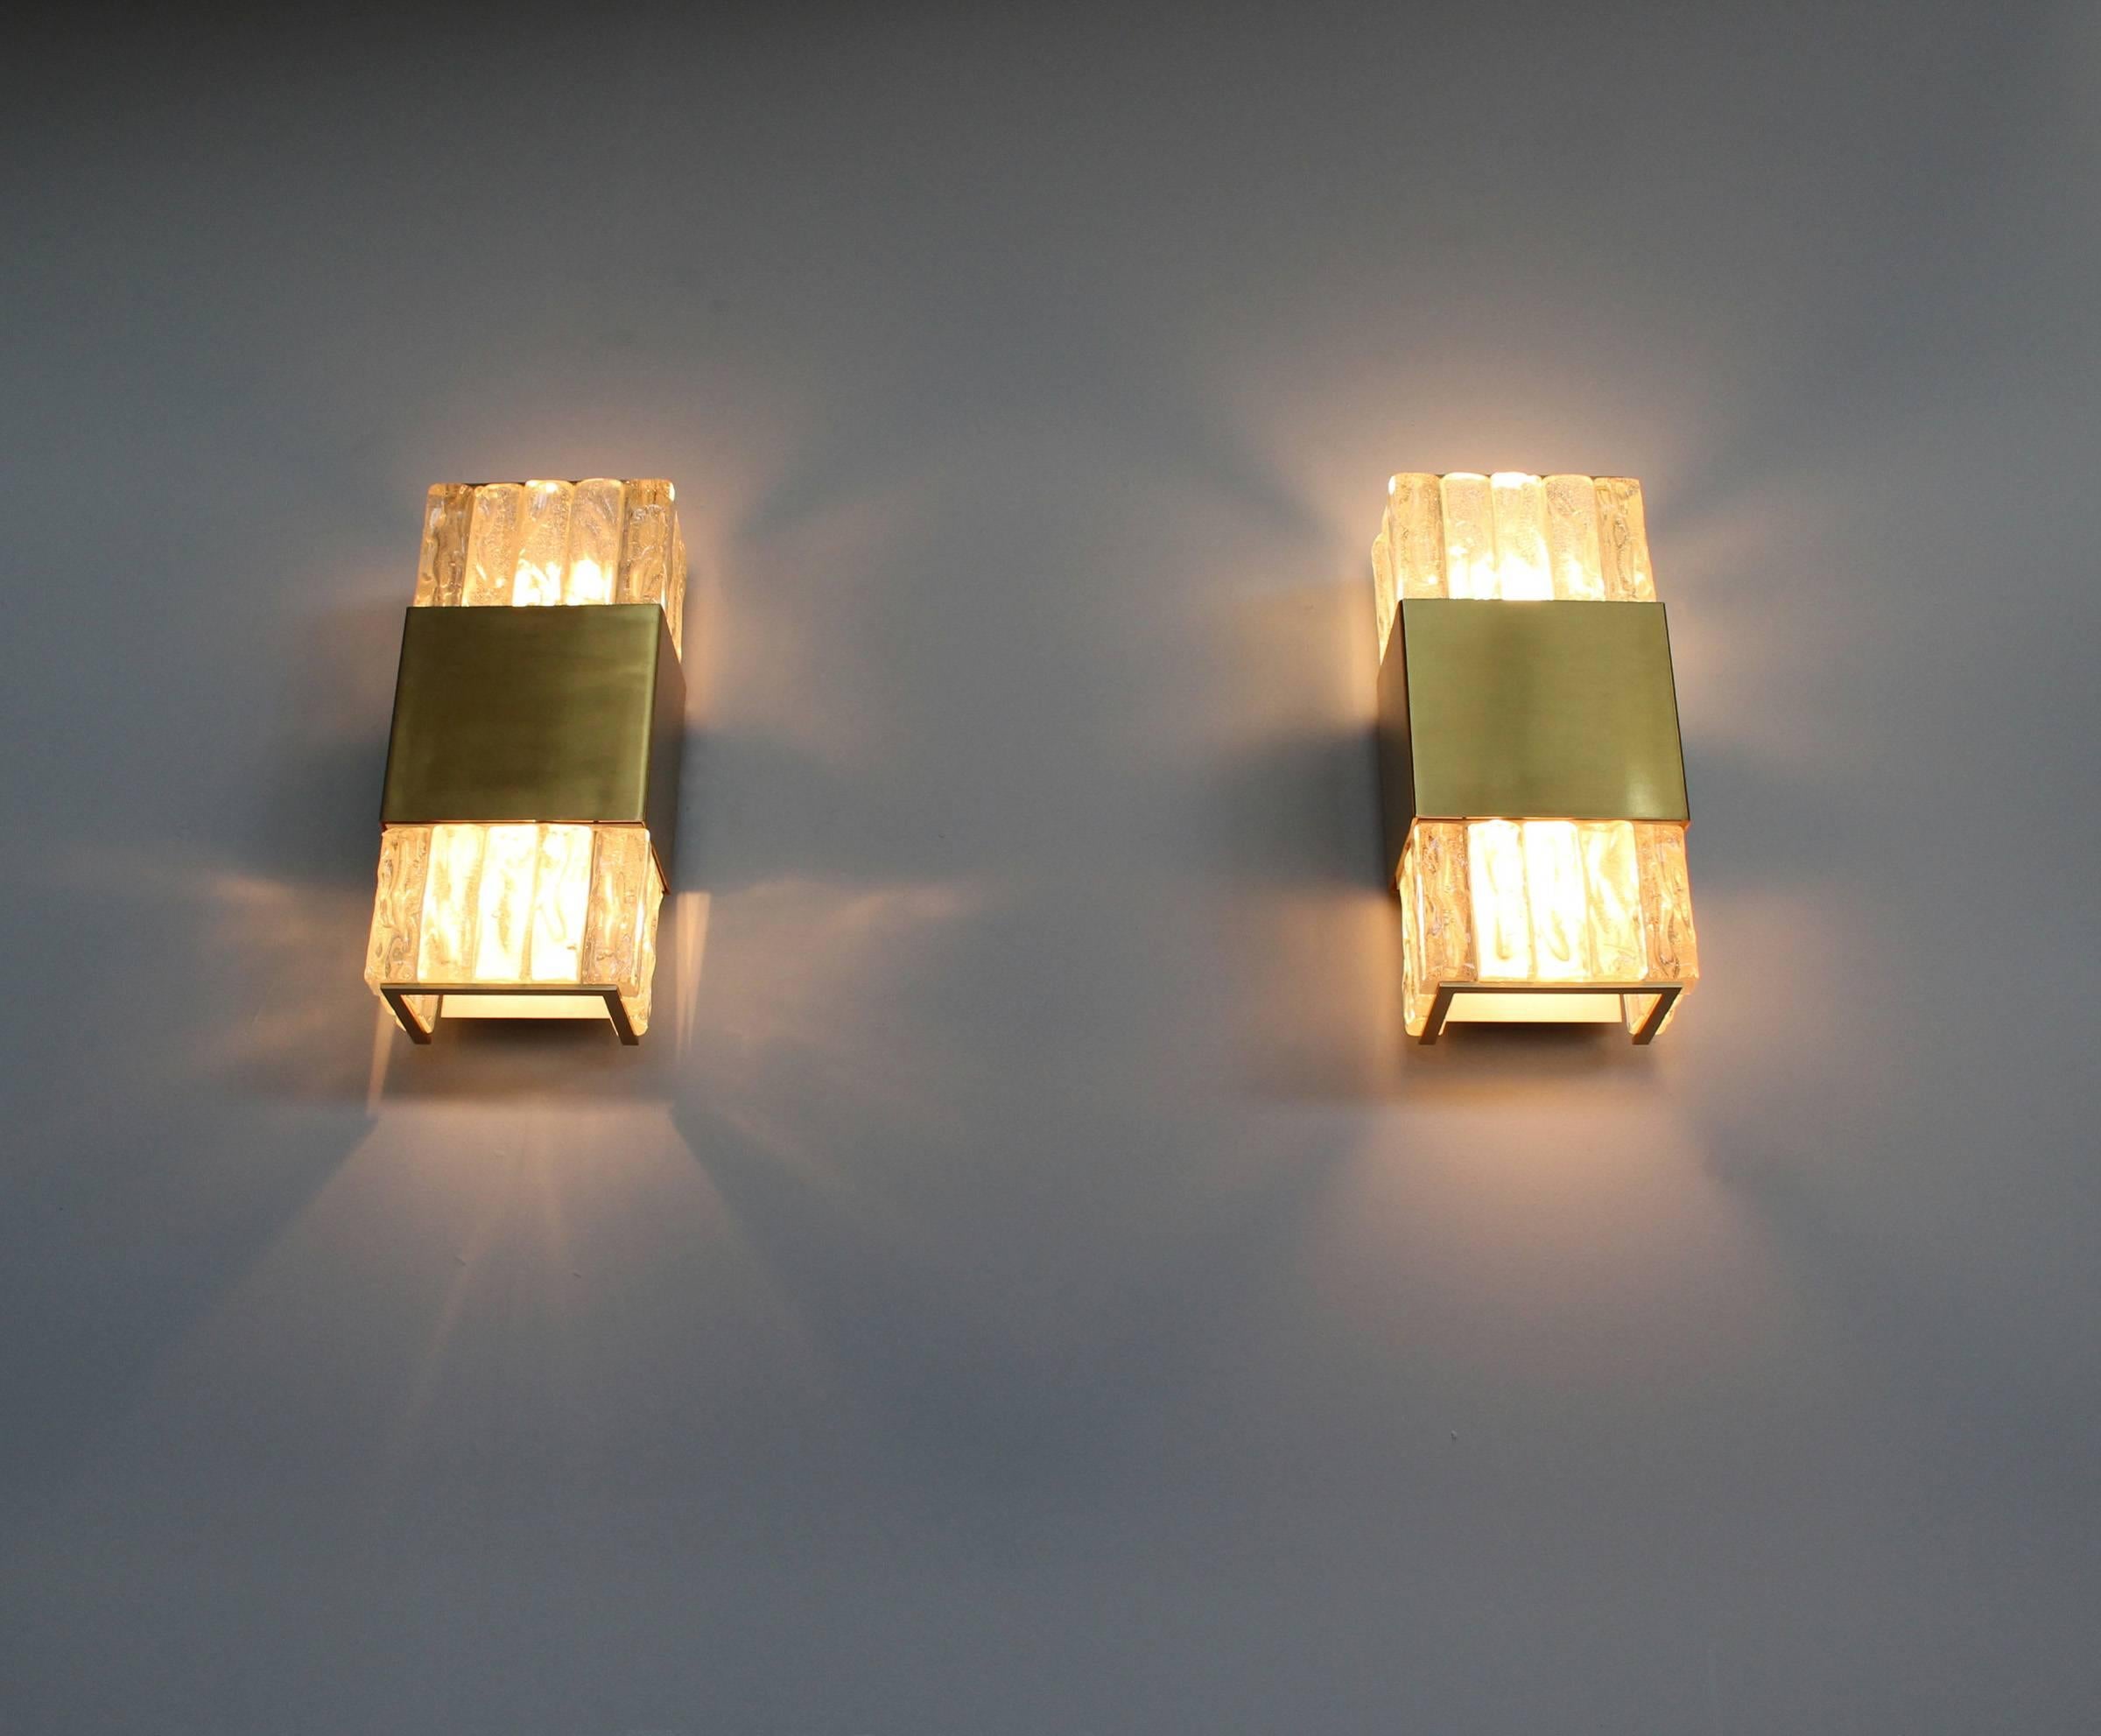 2 Fine French Art Deco Bronze and Glass Slabs Sconces by Perzel For Sale 5